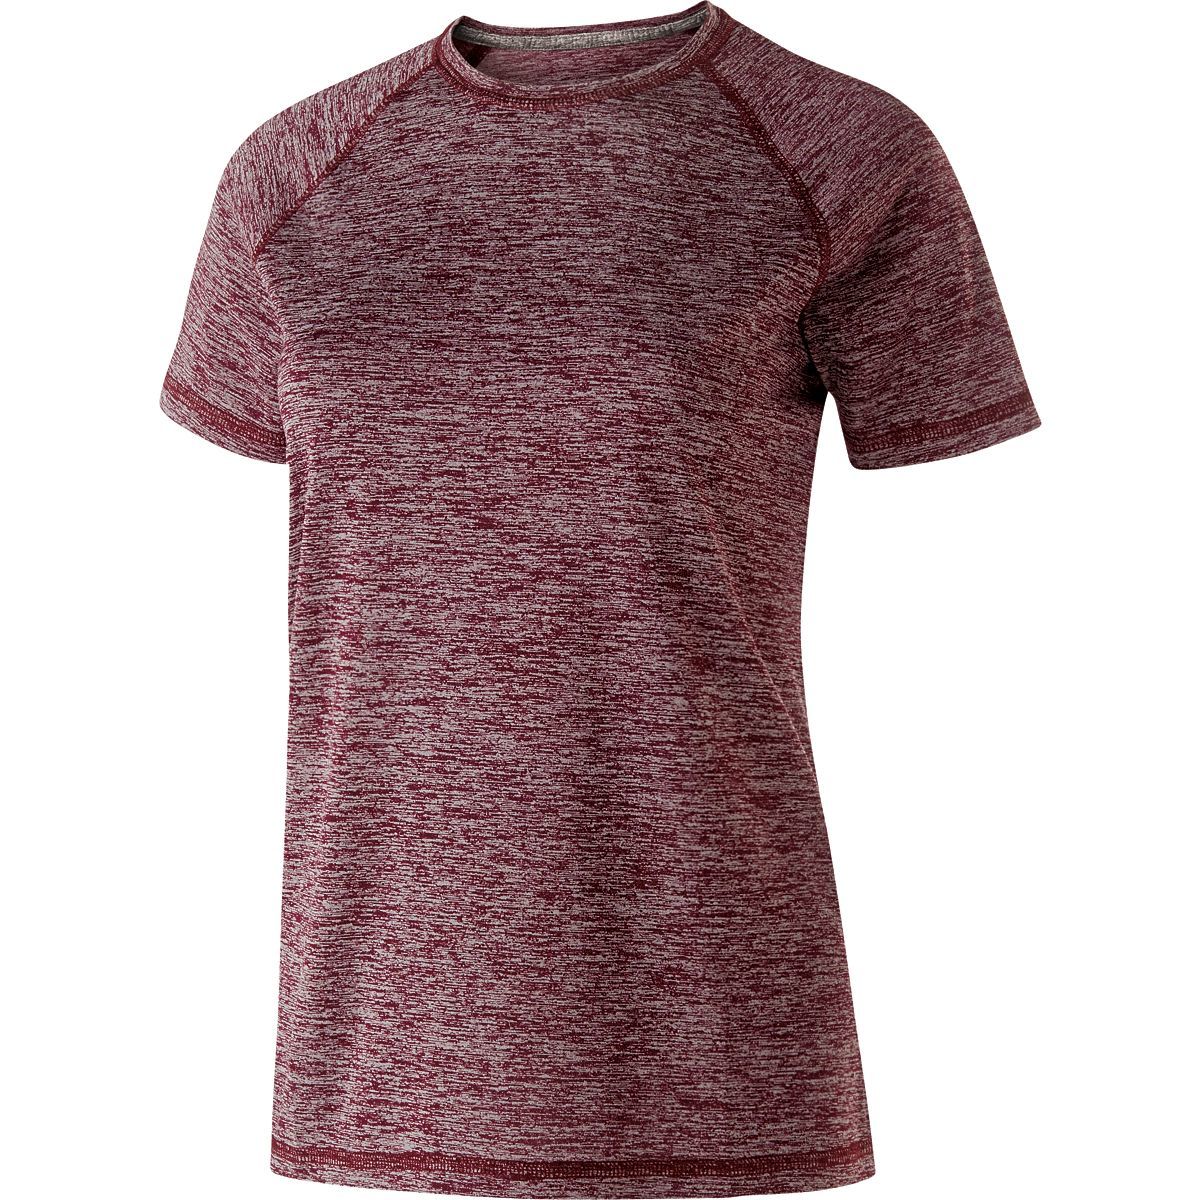 Holloway Ladies Electrify 2.0 Short Sleeve Shirt in Maroon Heather  -Part of the Ladies, Holloway, Shirts product lines at KanaleyCreations.com